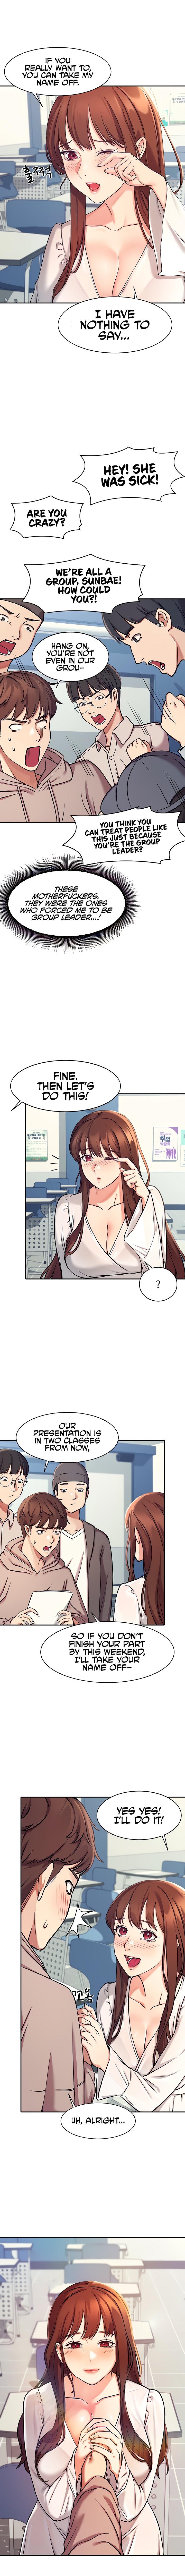 Is There No Goddess in My College? Ch.10/? 11